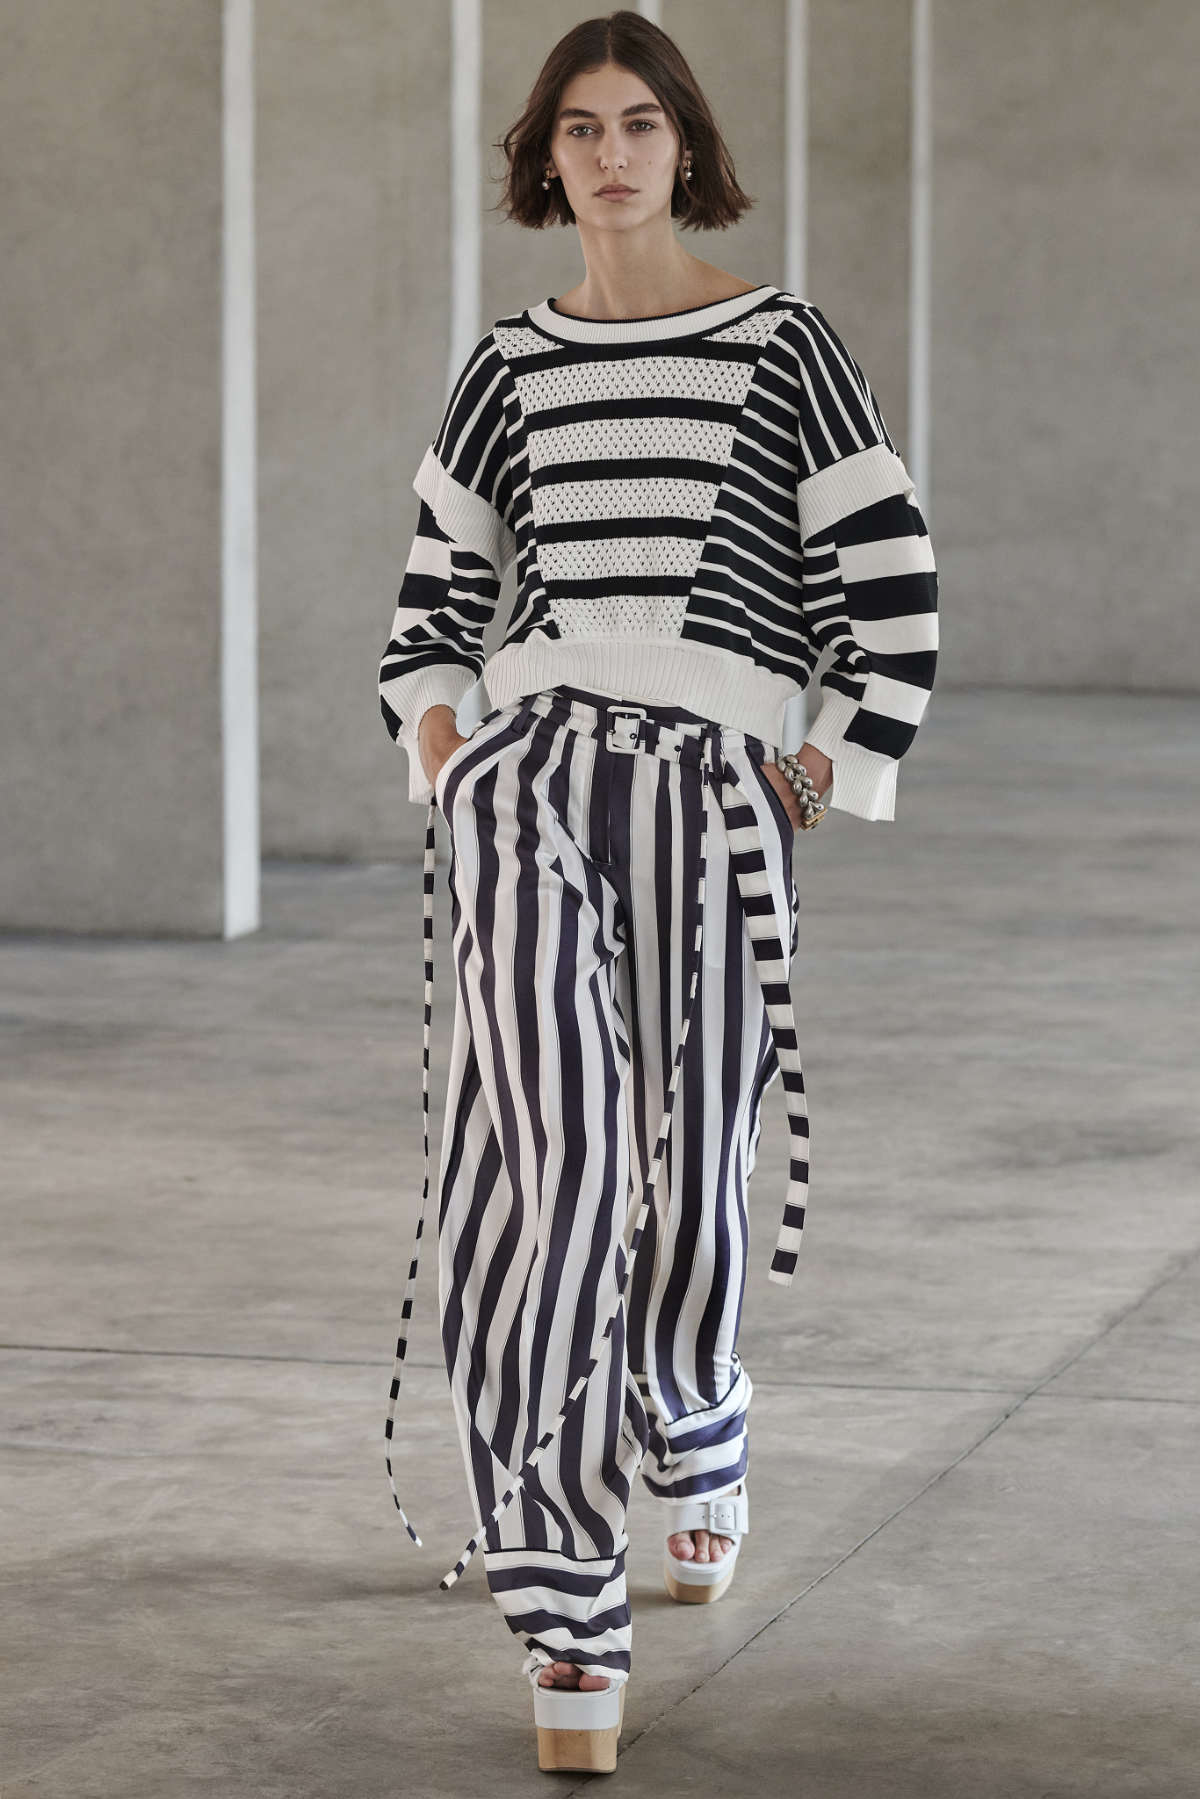 PORTS 1961 Presents Its New Resort 2023 Collection